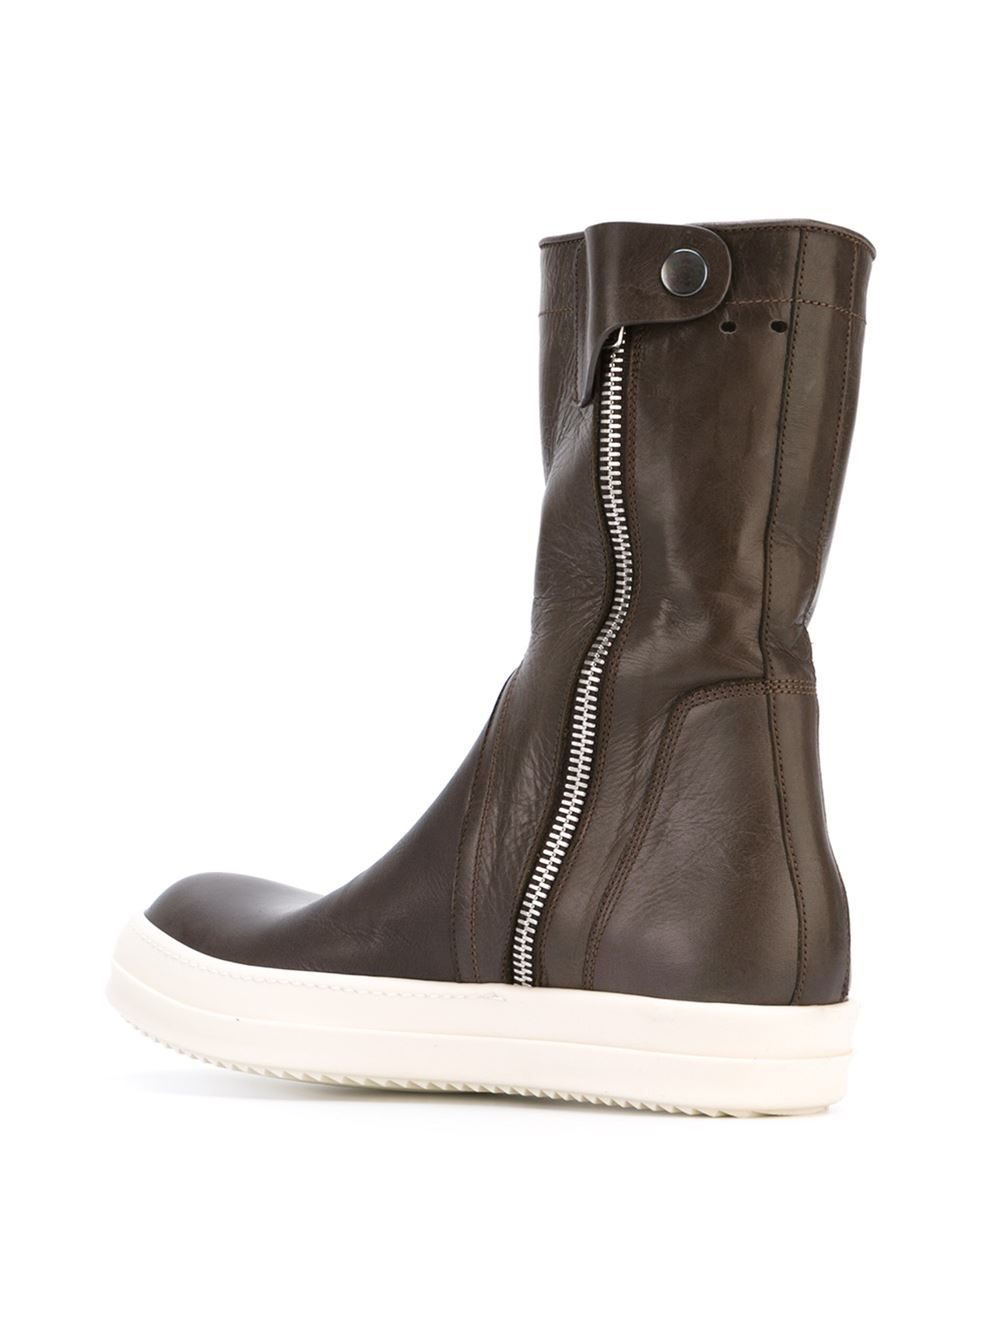 Lyst - Rick Owens Rigid Sole Boots in Gray for Men